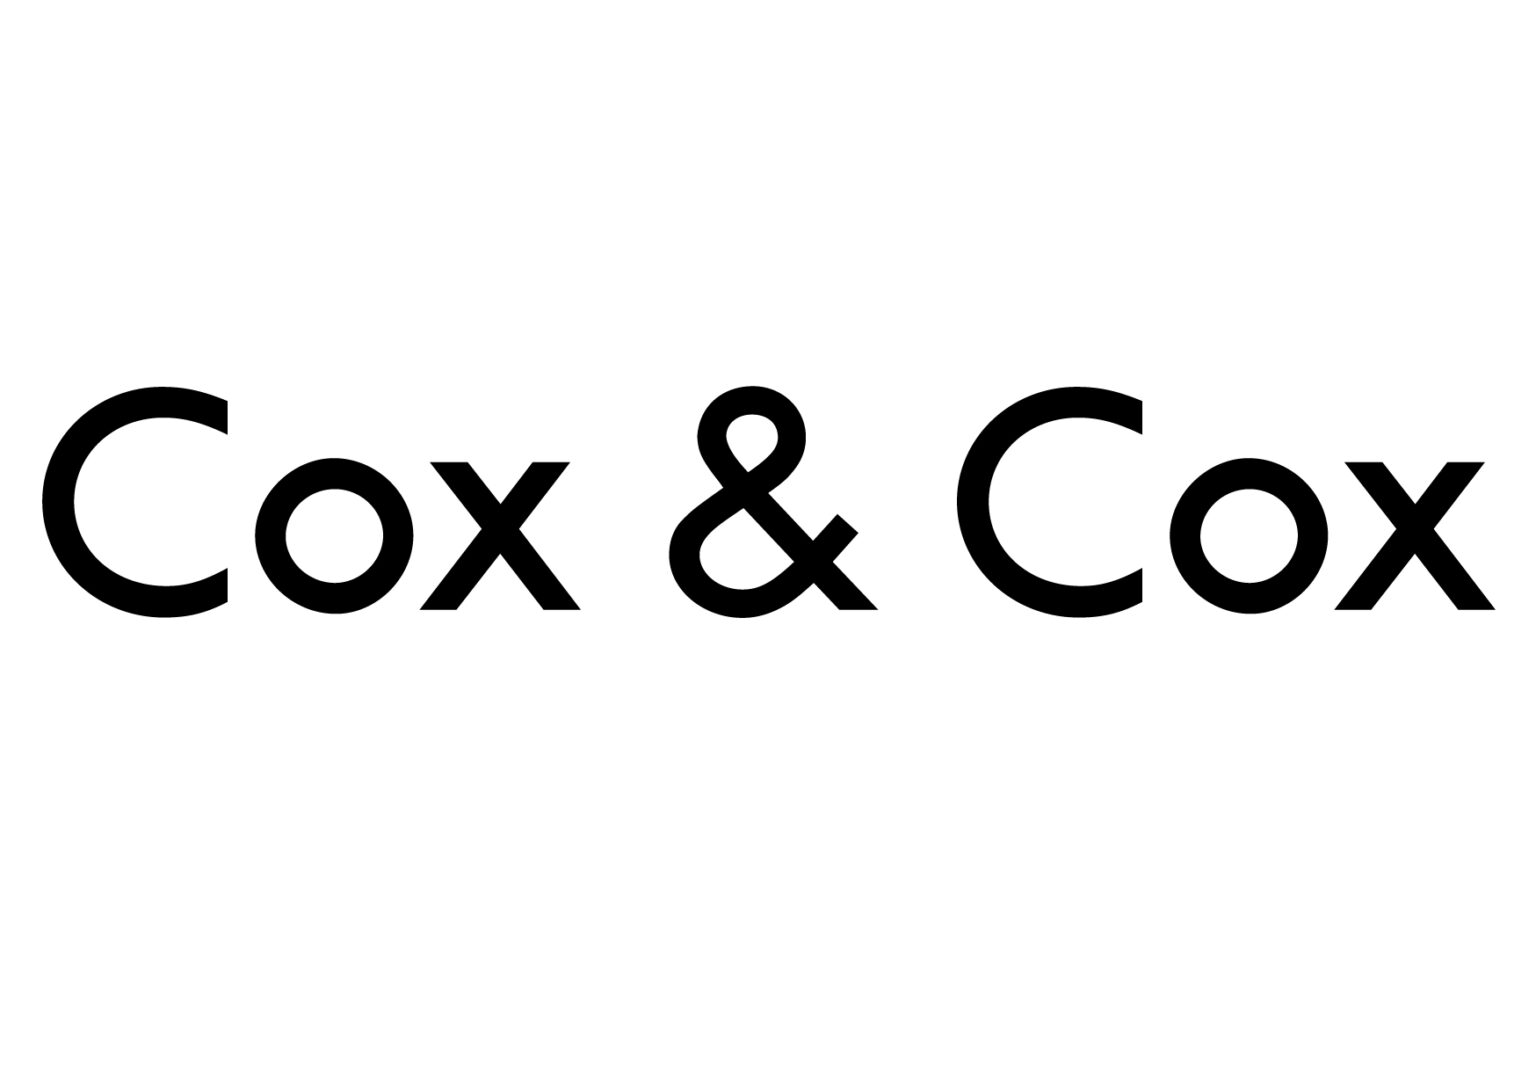 Cox & Cox joins Ombudsman as Sales Soar - Business in the News